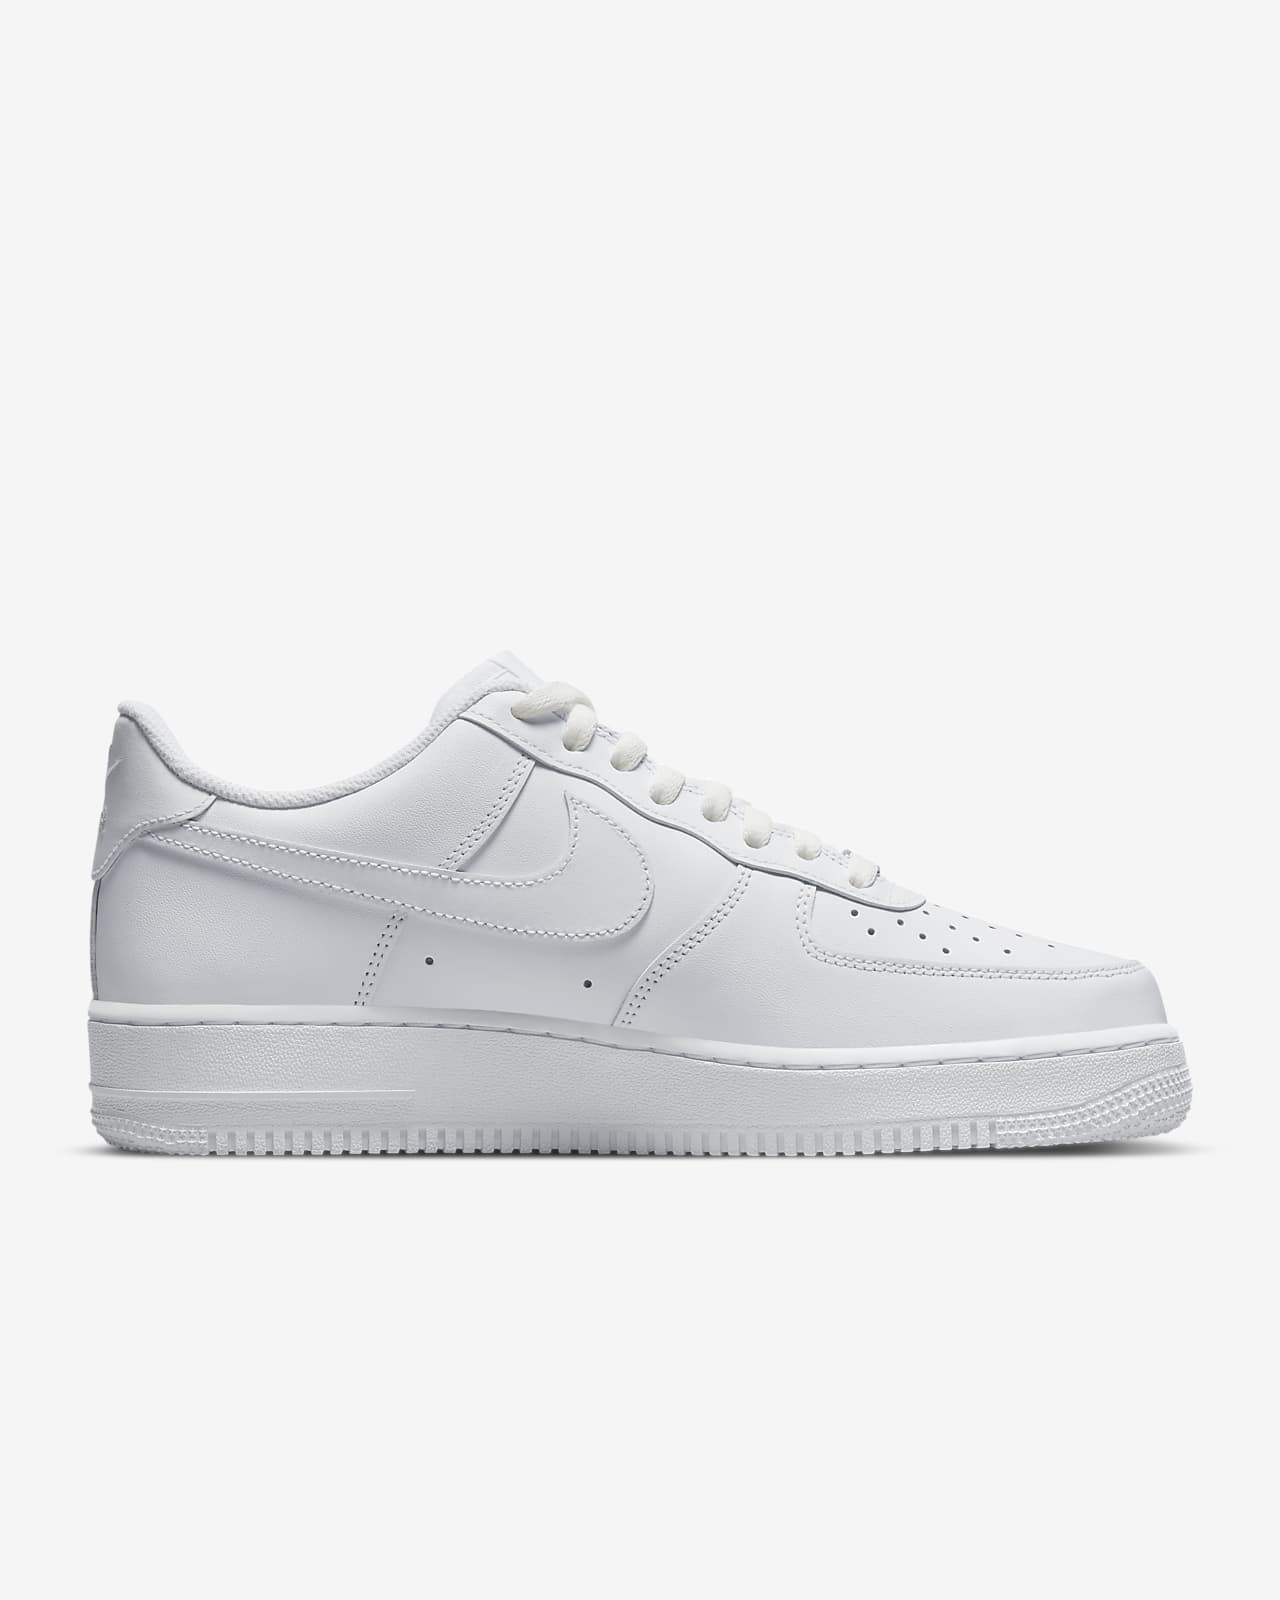 US W 6] Nike Air Force 1 UV Colour Changing Photochromic Shoe as seen on  TikTok, Women's Fashion, Footwear, Sneakers on Carousell